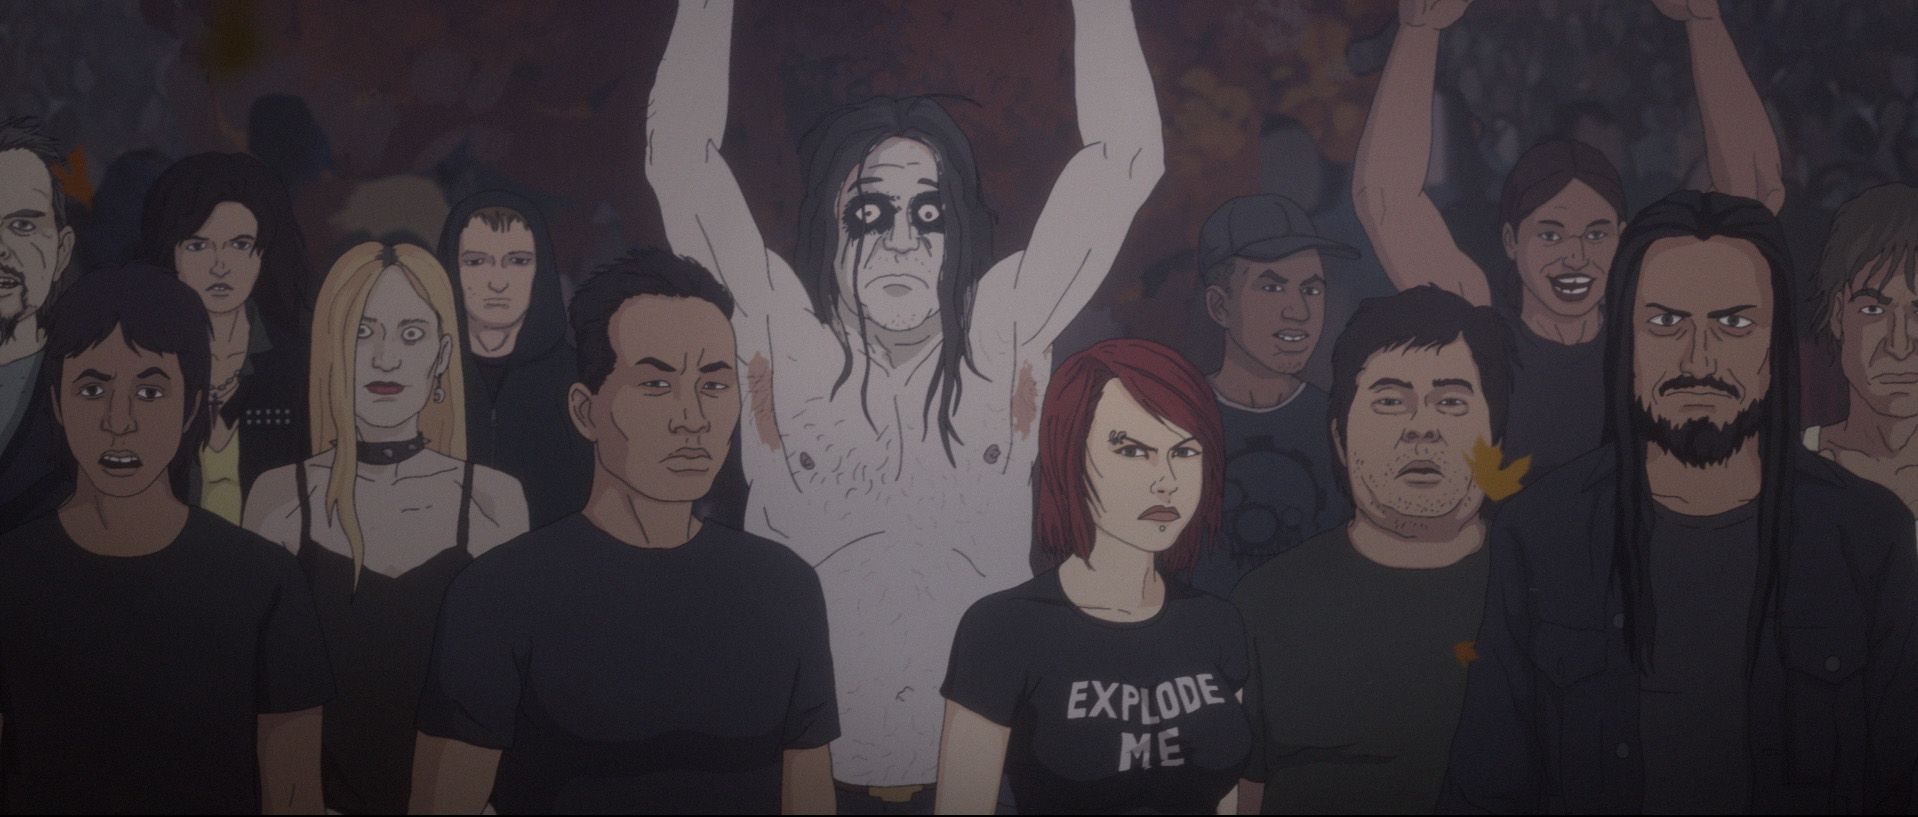 A screenshot from the new Metalocalypse movie of fans waiting to see the band.